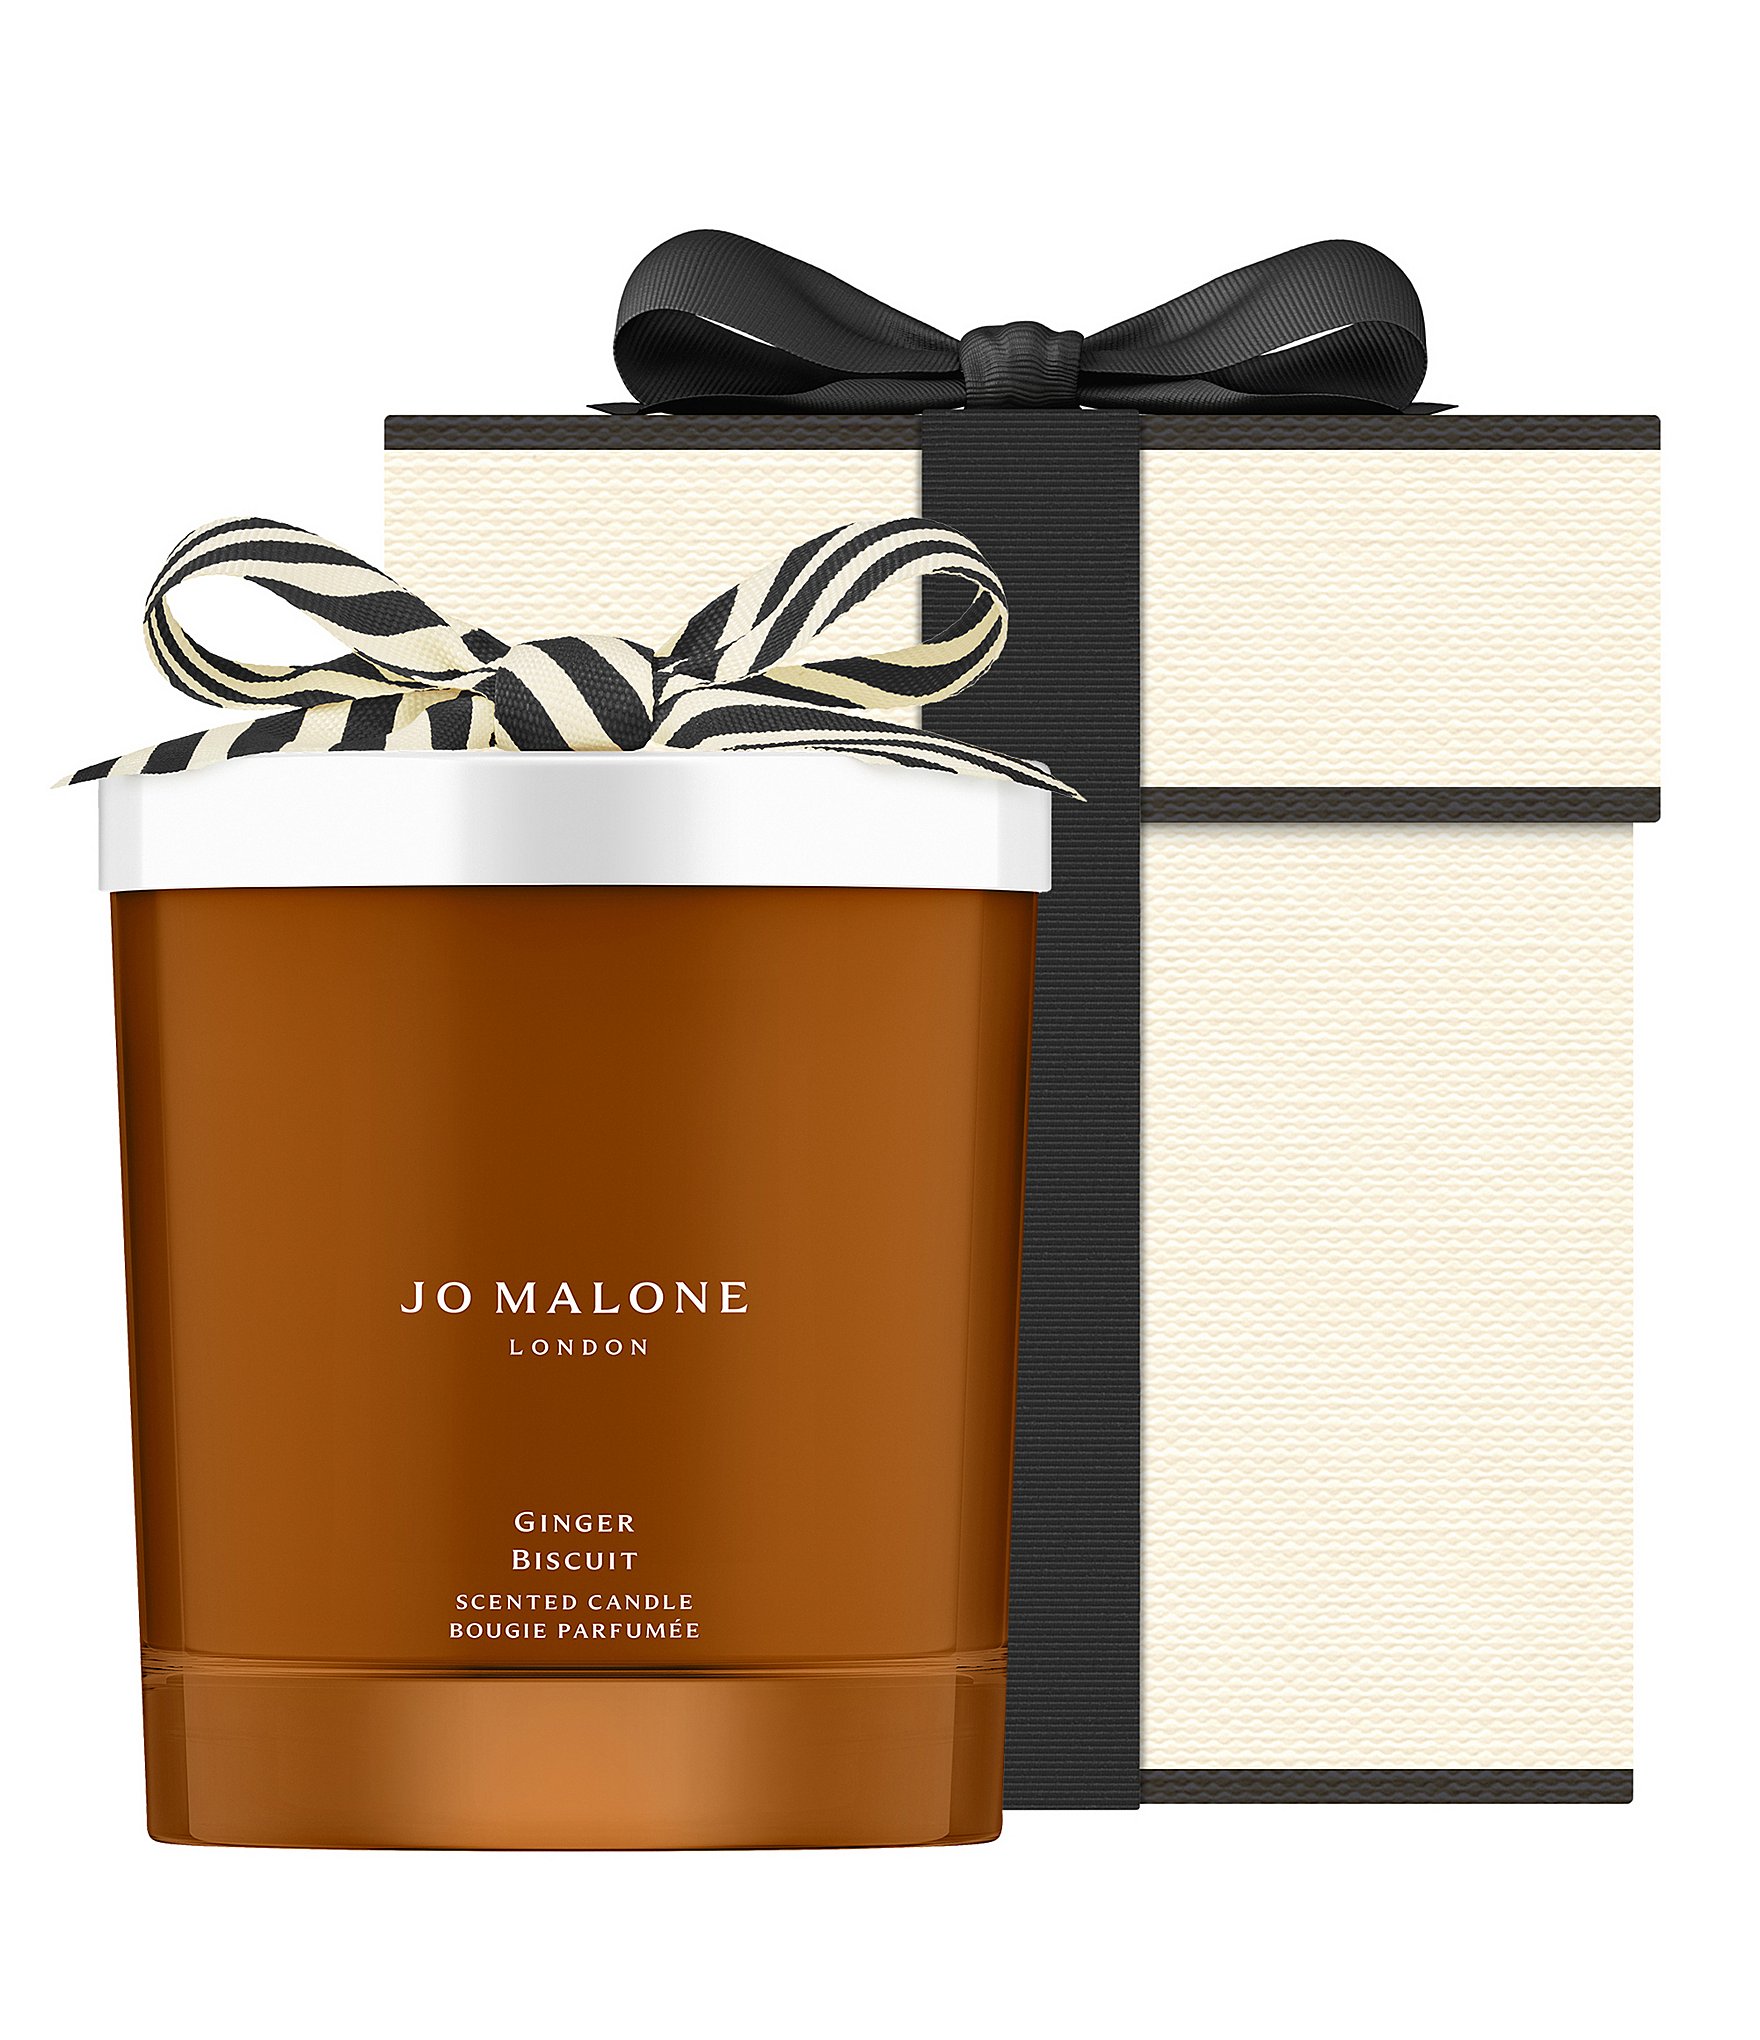 https://dimg.dillards.com/is/image/DillardsZoom/zoom/jo-malone-london-ginger-biscuit-limited-edition-home-candle-7oz./00000000_zi_20430091.jpg